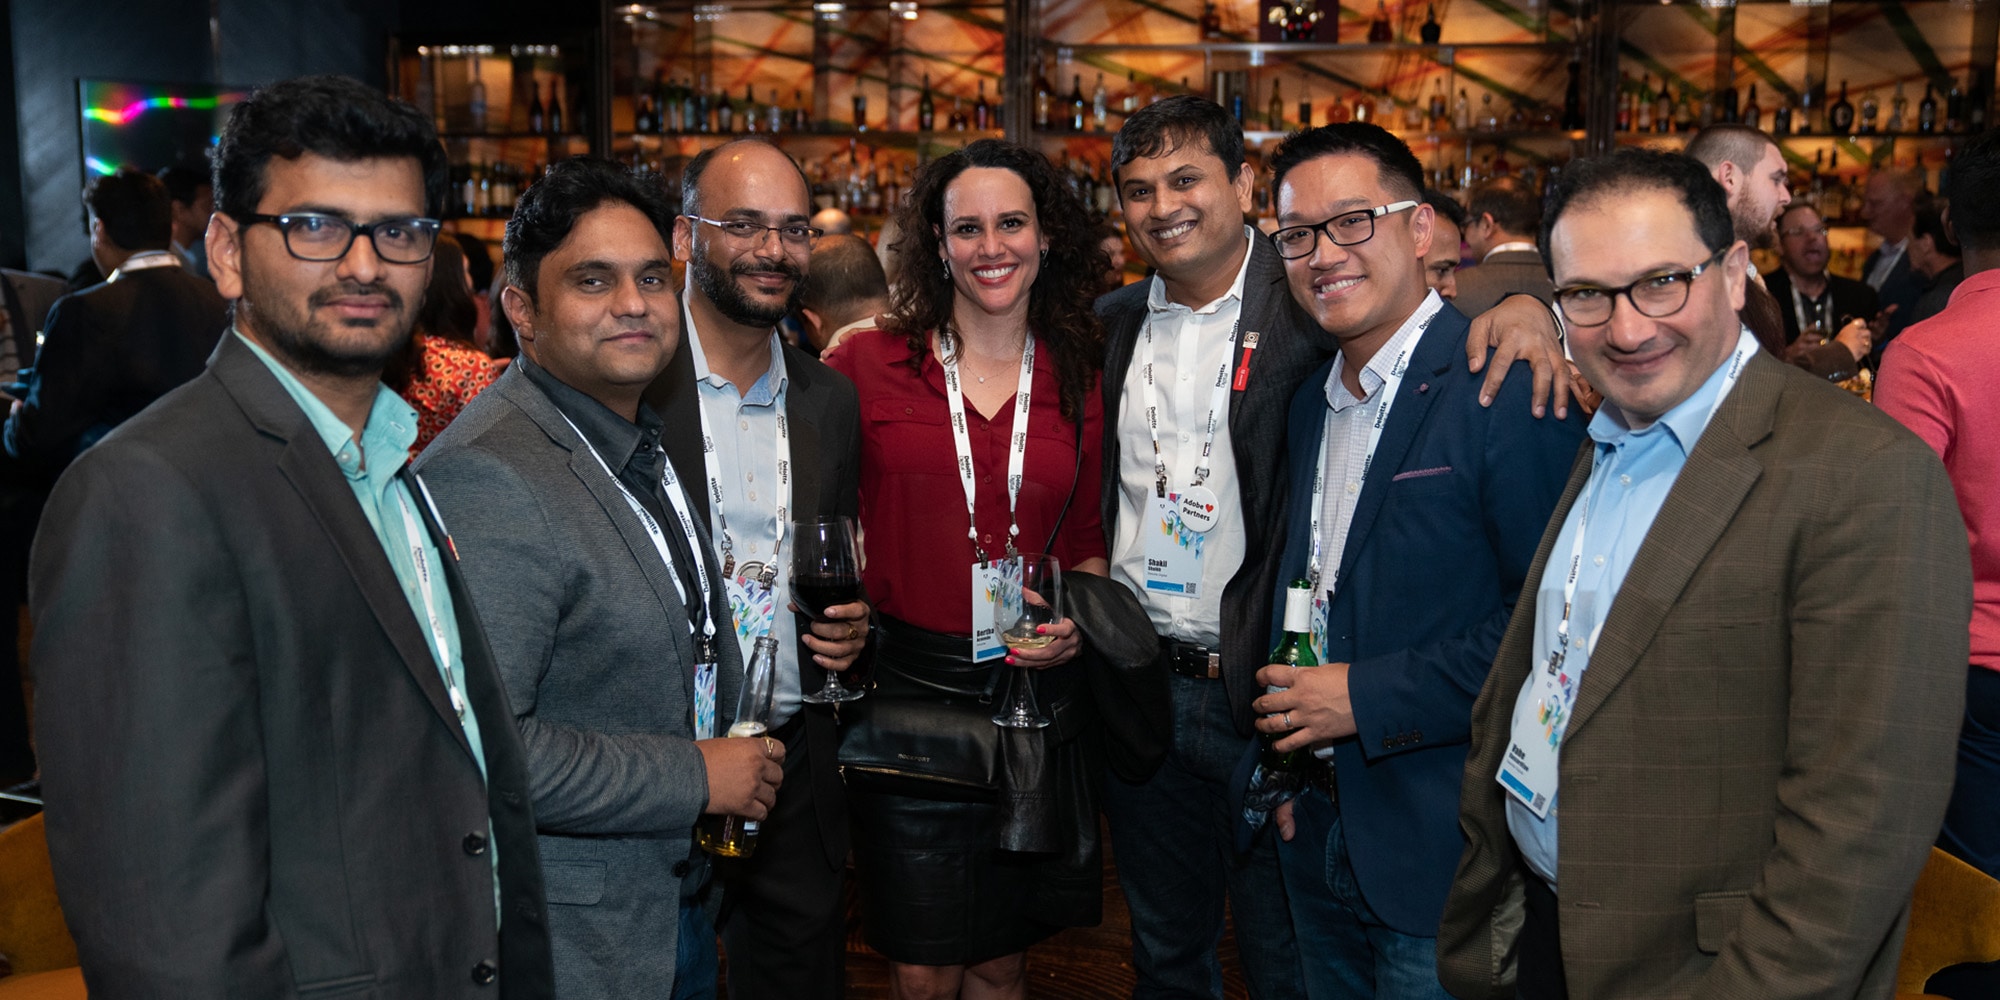 All smiles as we connect with our global counterparts at the Welcome Receptions!